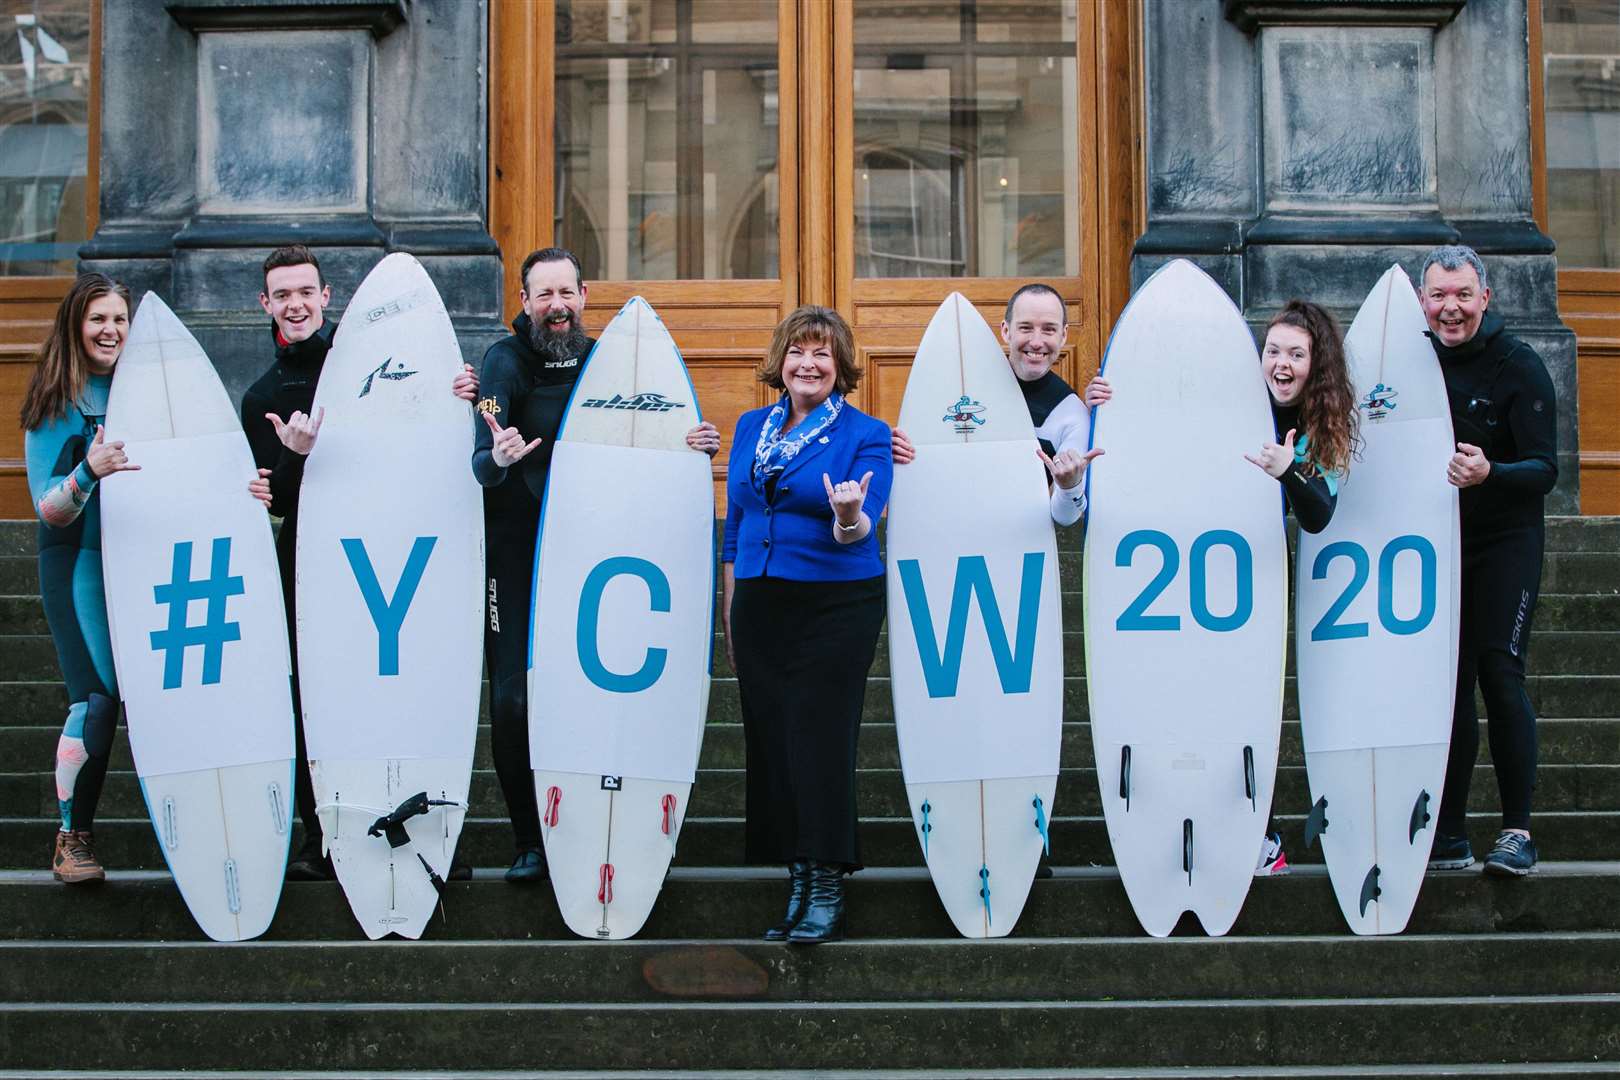 Fiona Hyslop joins a group of surfers to promote Scotland’s Year of Coasts and Waters 2020.